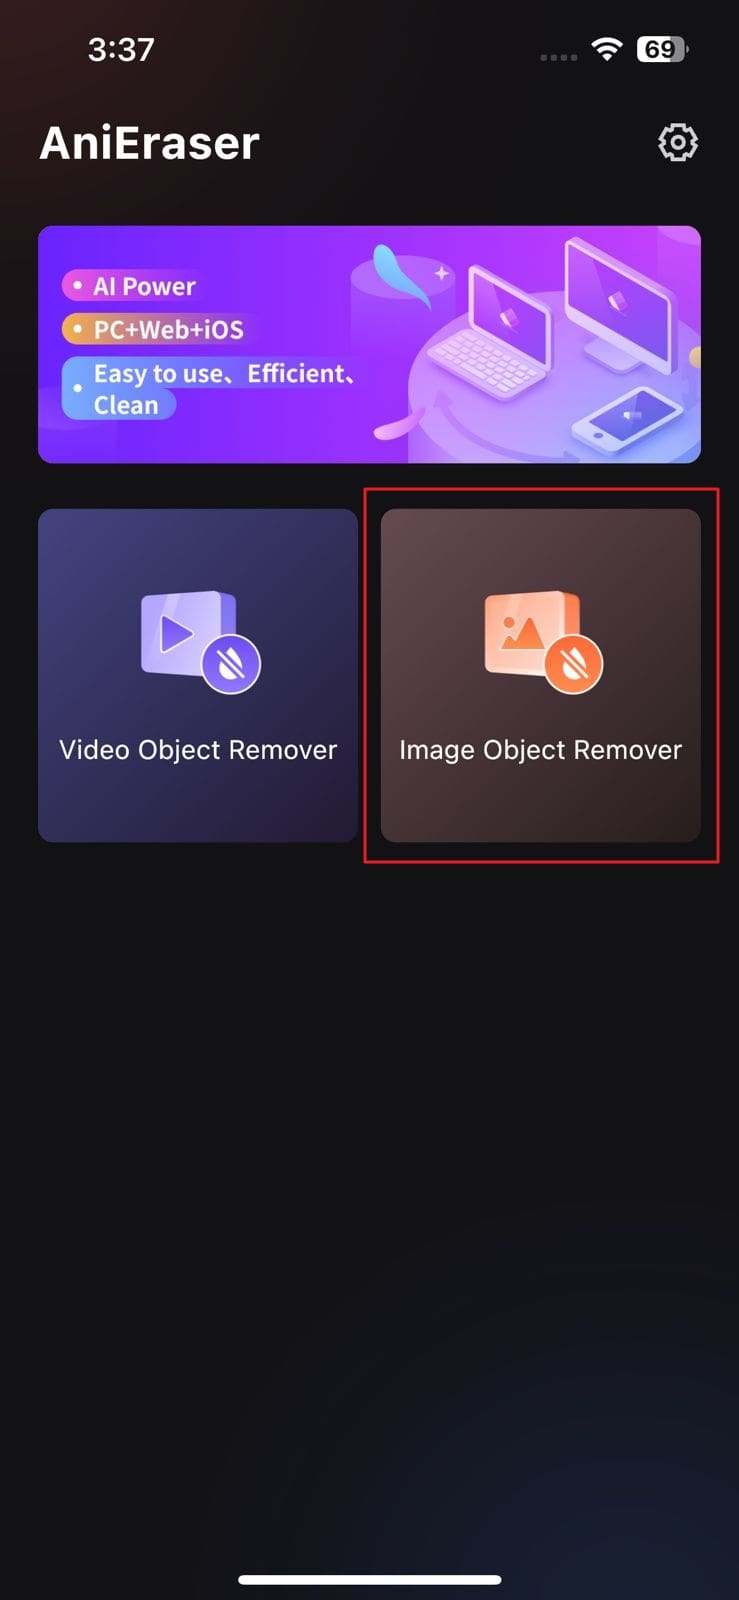 tap on image object remover